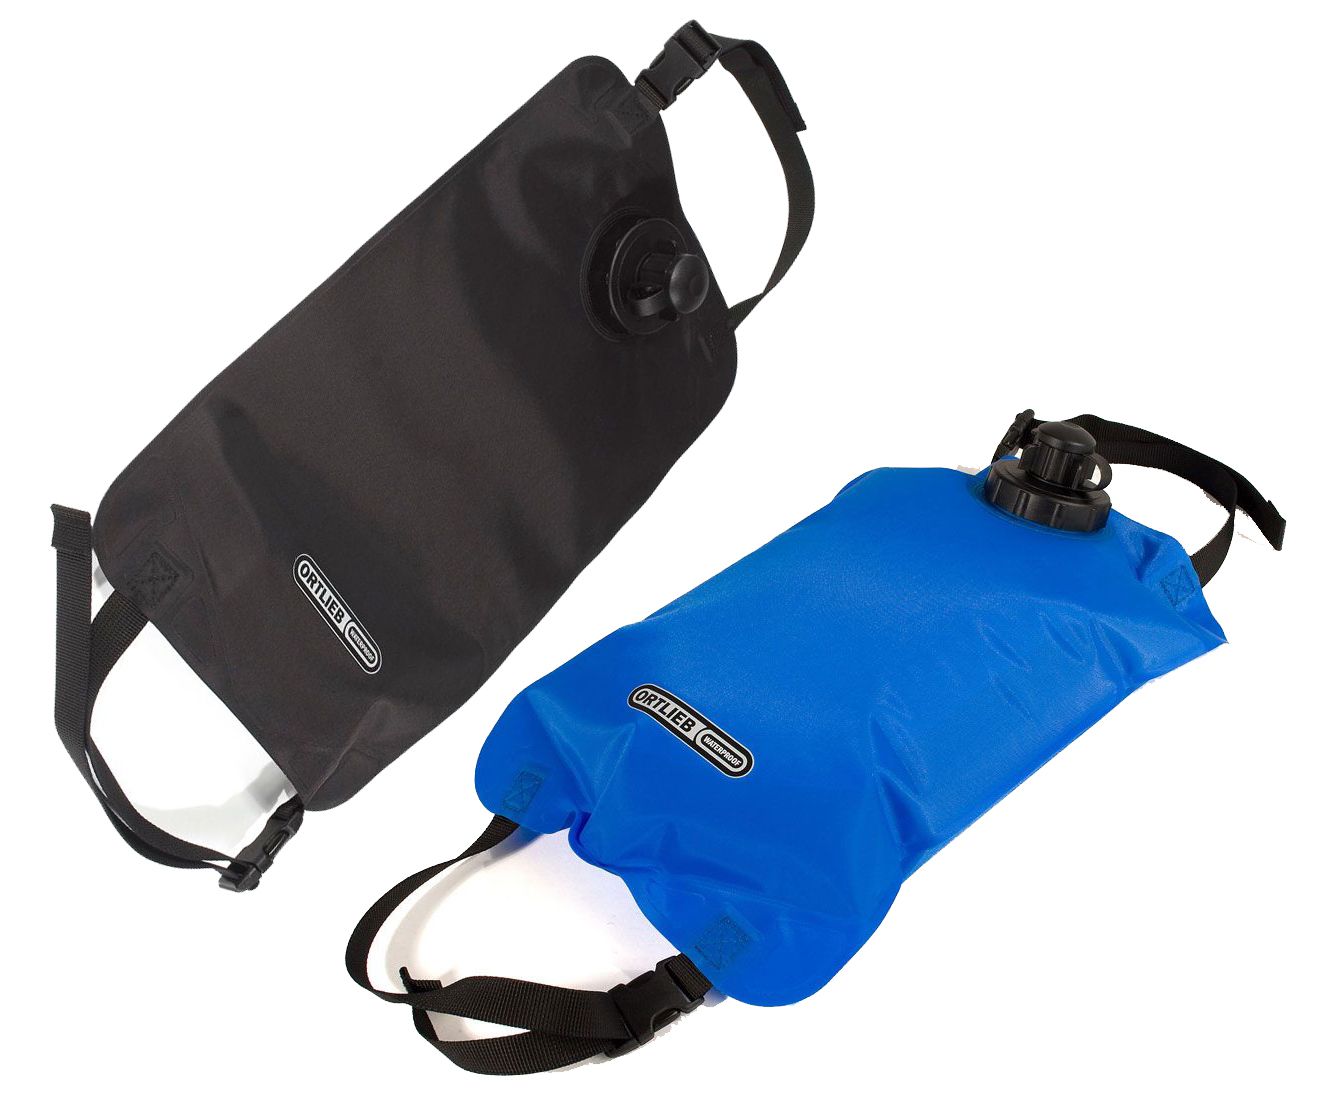 Ortlieb Water Bag 4 Litre - £24.99 | Camping - Water Containers and ...